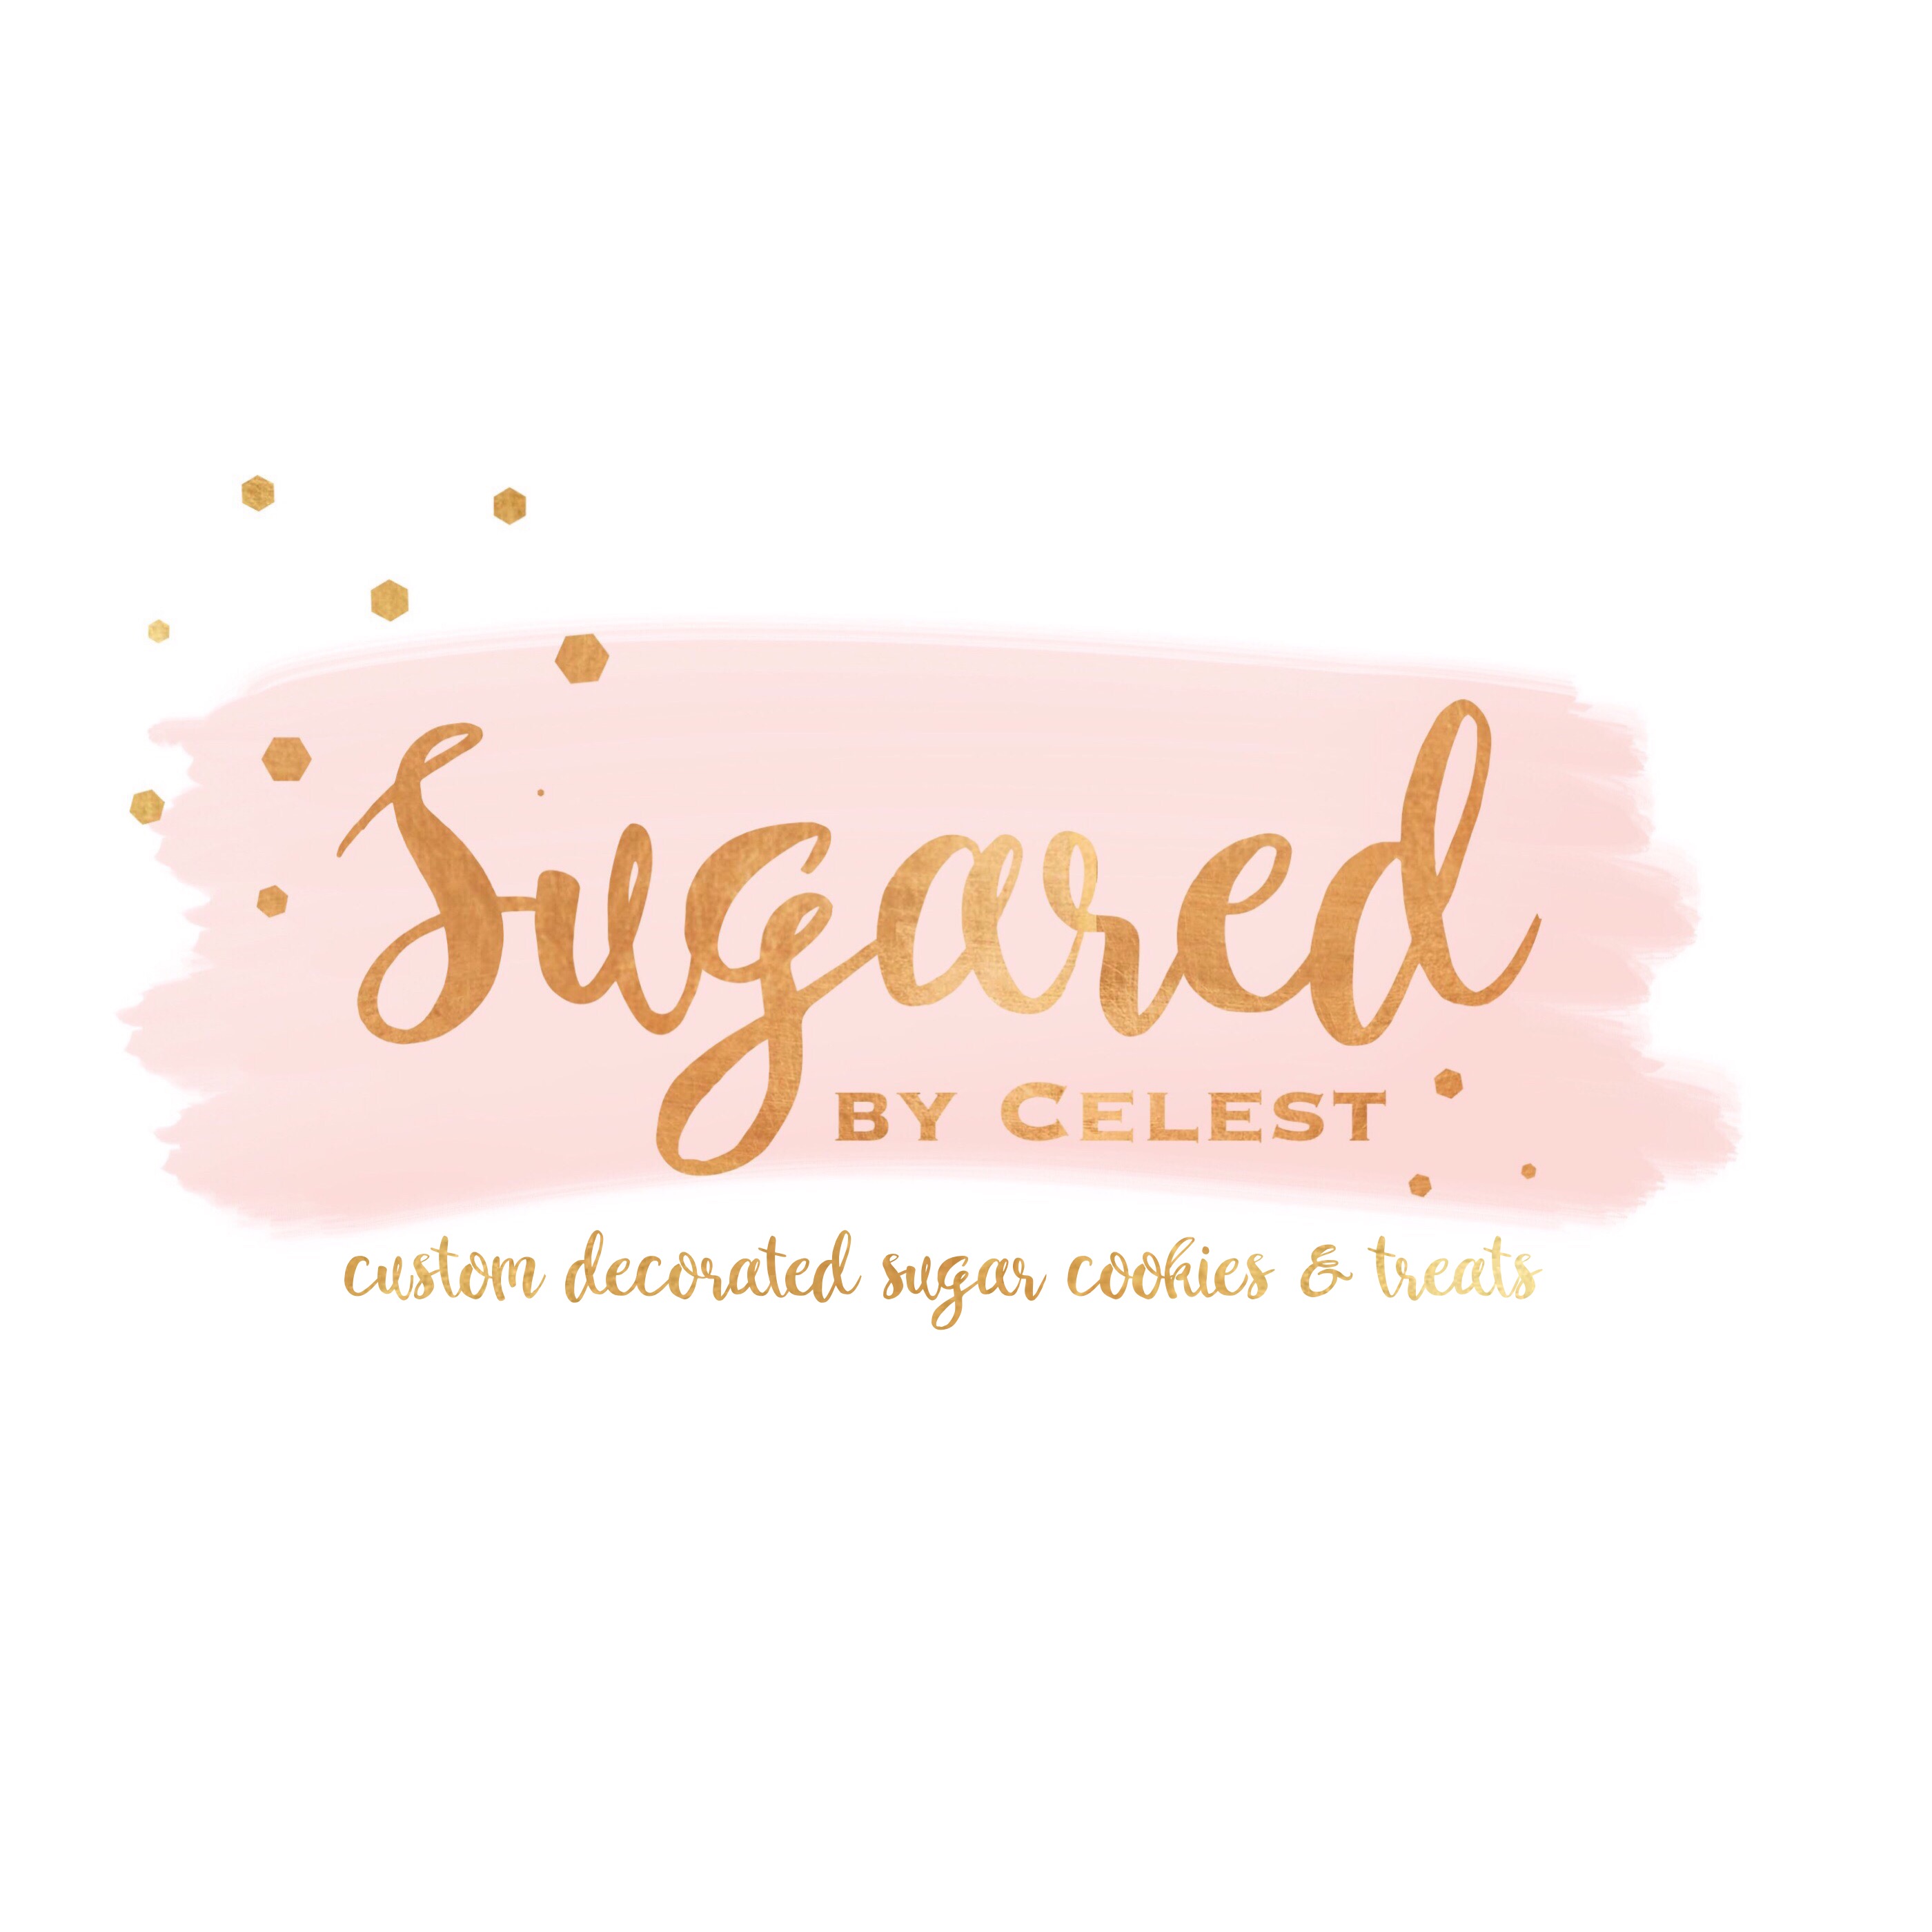 Sugared by Celest